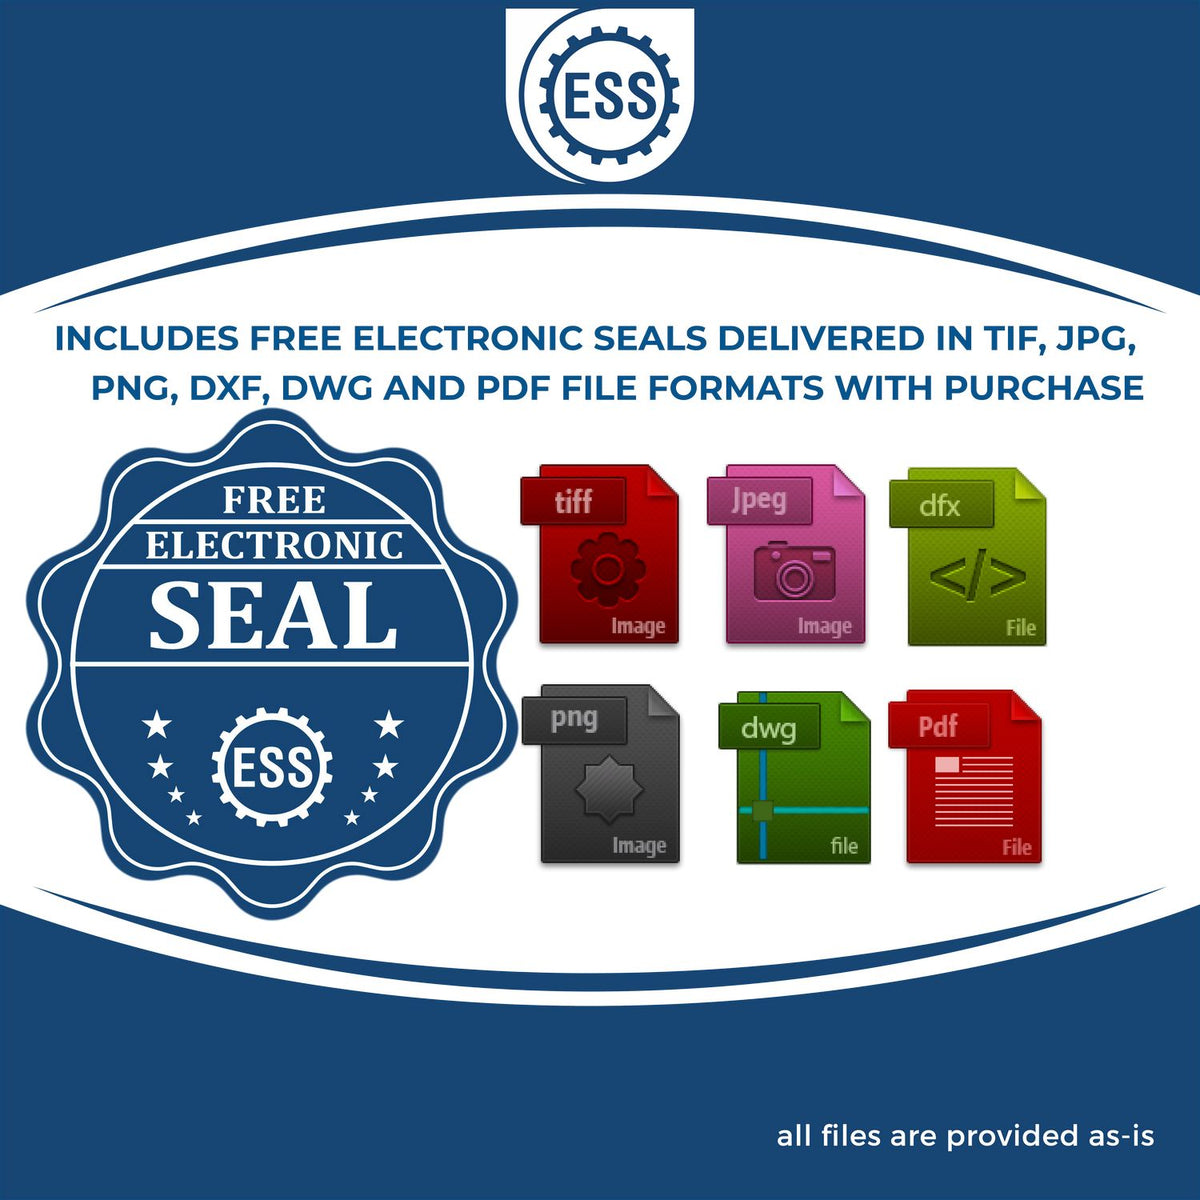 An infographic for the free electronic seal for the Extended Long Reach Kentucky Surveyor Embosser illustrating the different file type icons such as DXF, DWG, TIF, JPG and PNG.